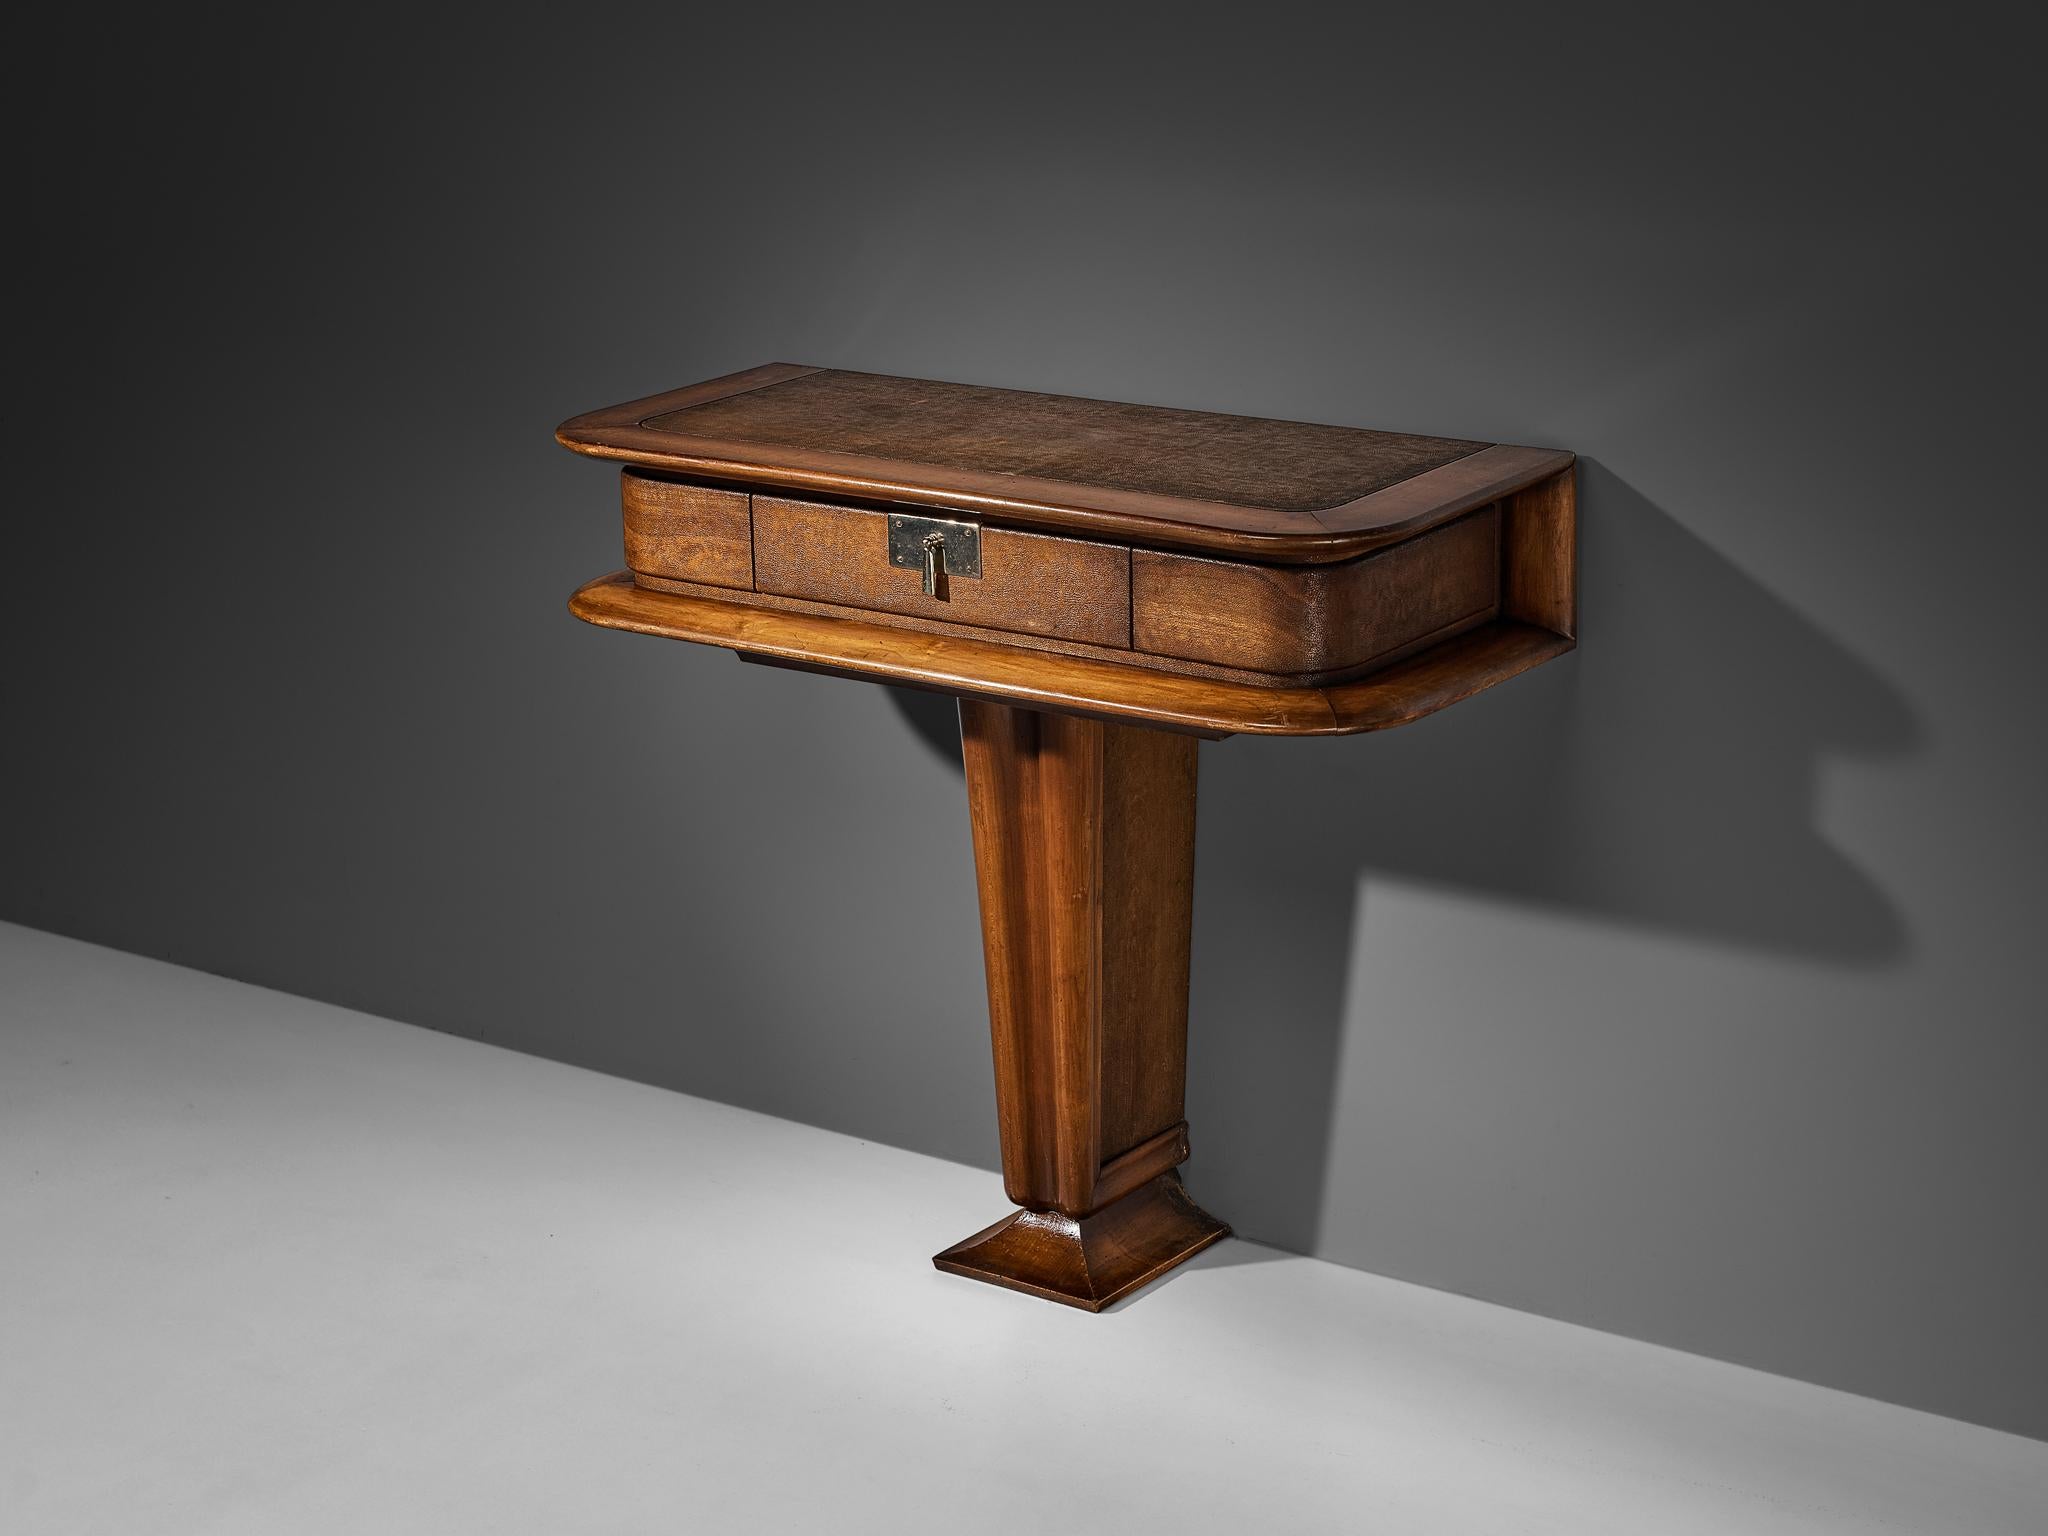 Vittorio Valabrega, console with drawer, walnut, leather, steel, Italy, 1940s

This console by the Italian designer Vittorio Valabrega is sculptural and elegant. Note the details in the base or the fine lines that surround the drawer. A metal handle